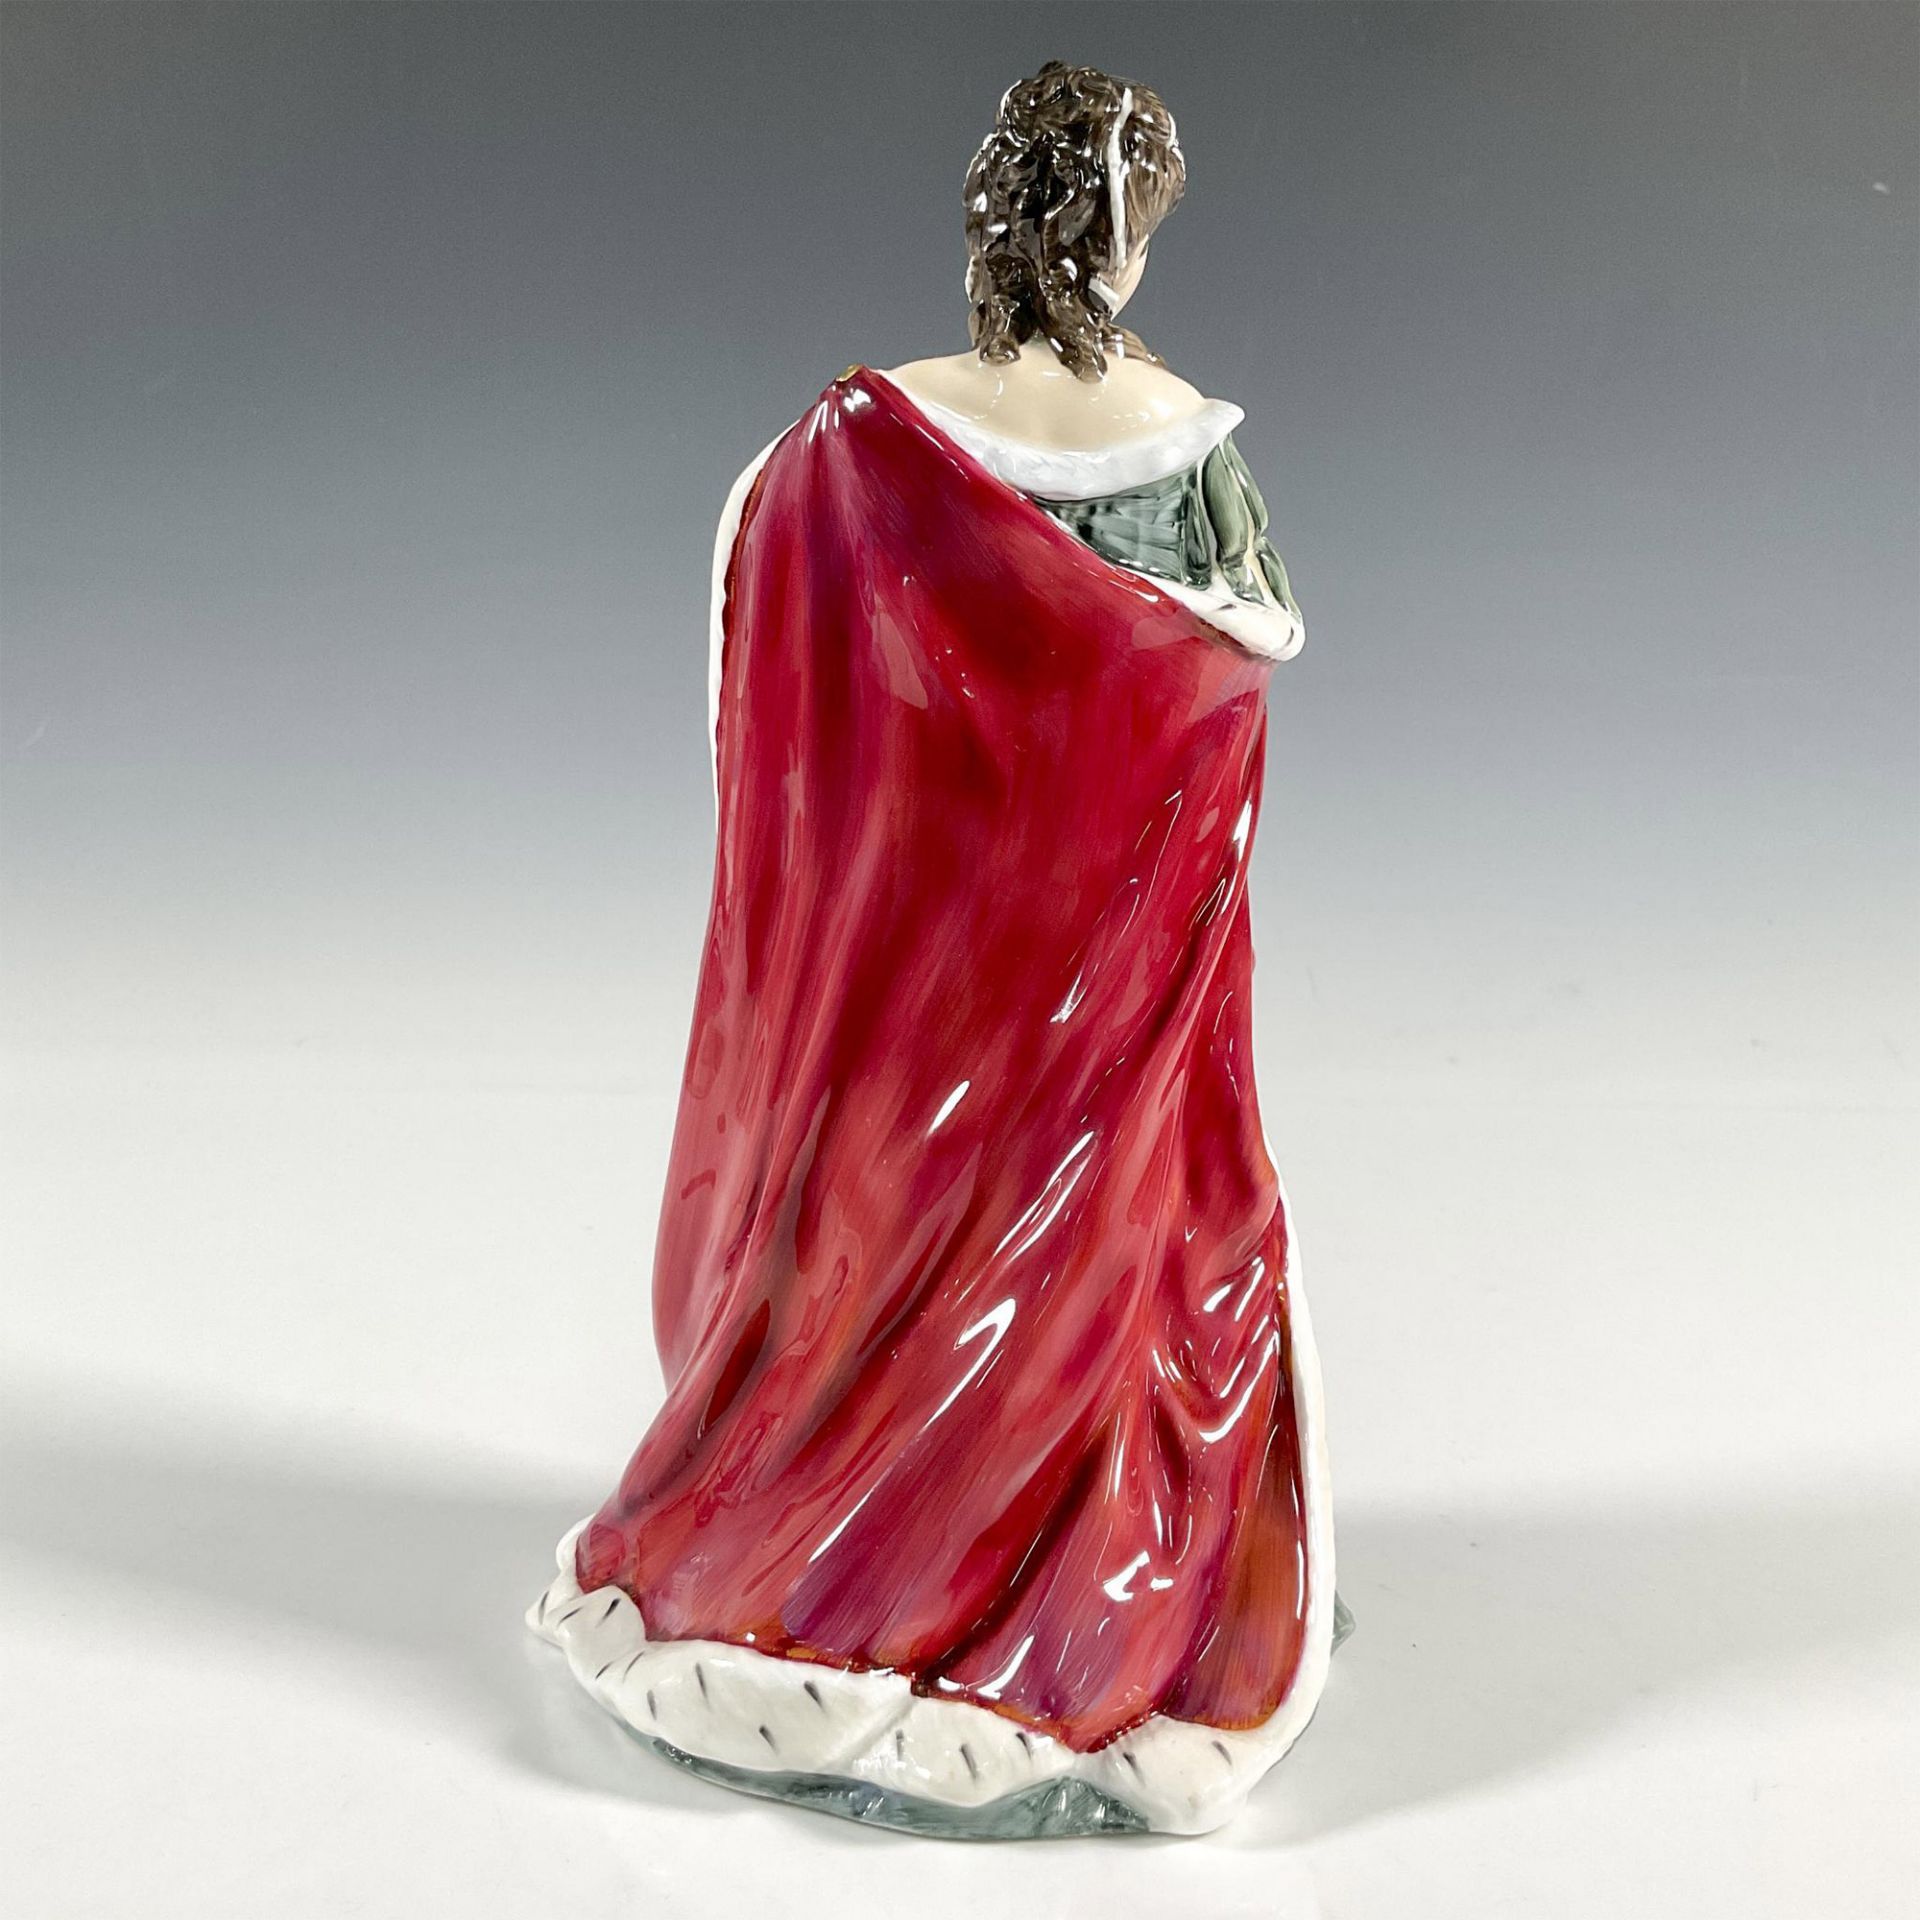 Queen Anne HN3141 - Royal Doulton Figurine - Image 2 of 3